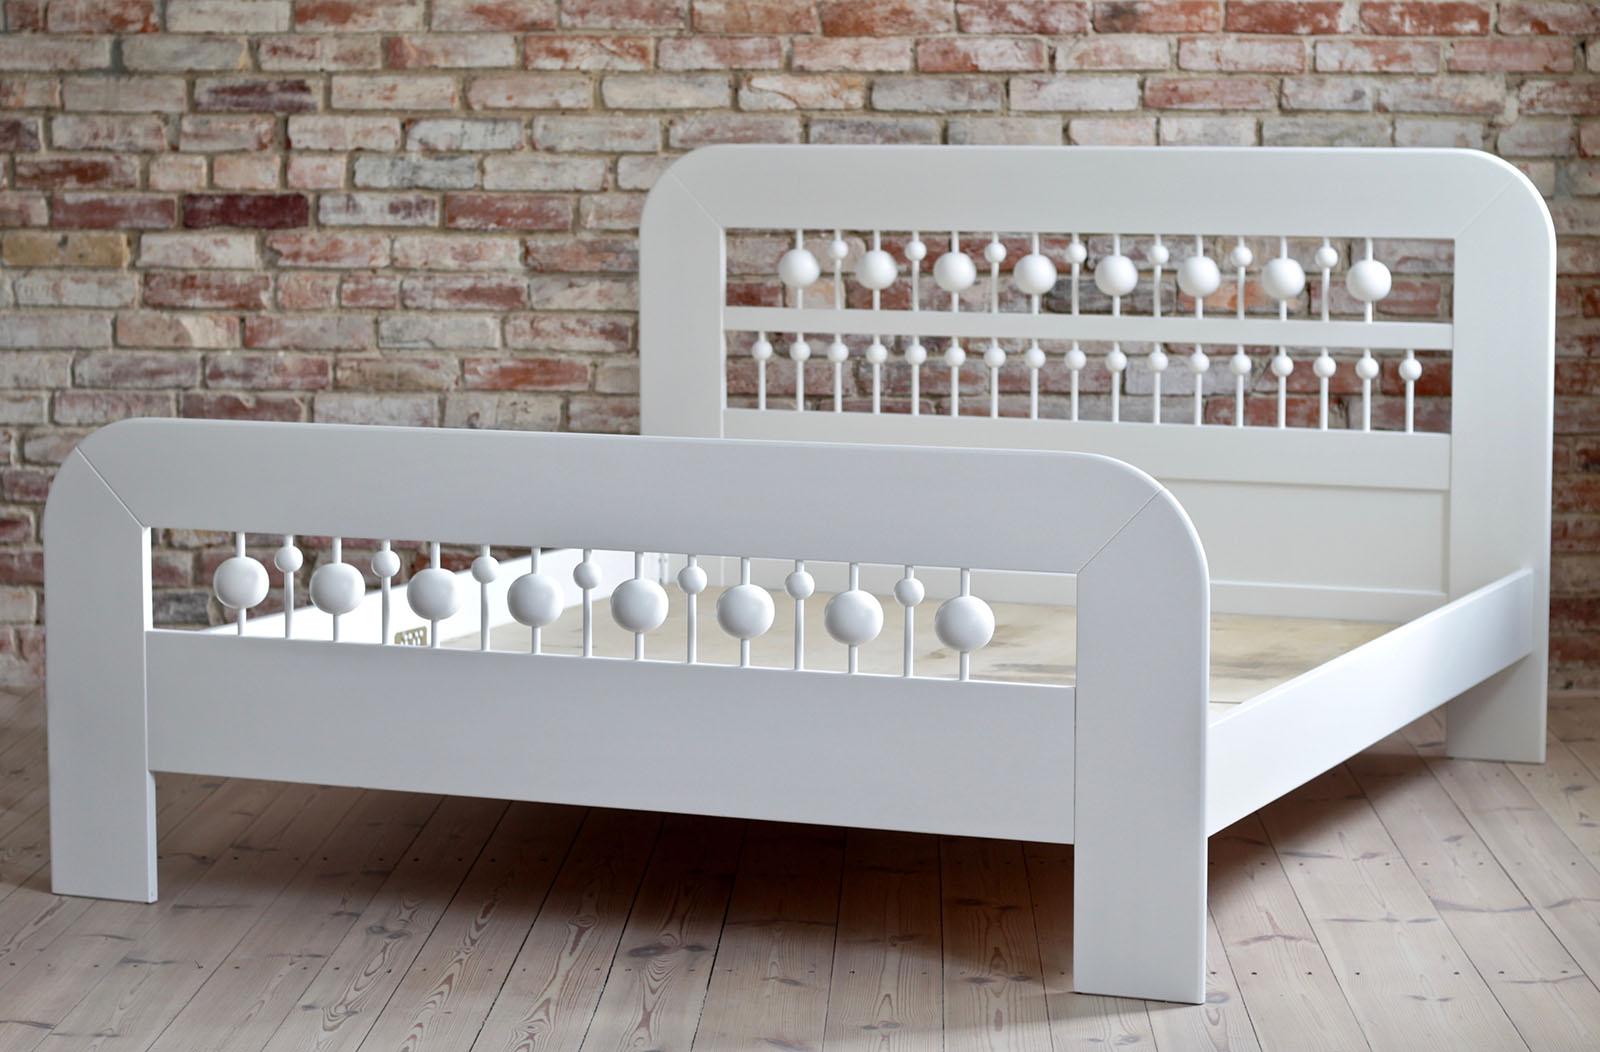 This extremely rare bed was designed by famous Finnish designer Eero Aarnio. It was produced by ASKO, Finland around 1970s. This piece is in very good condition - the surface has been repainted and is fresh and ready to use. The bed fits a materace